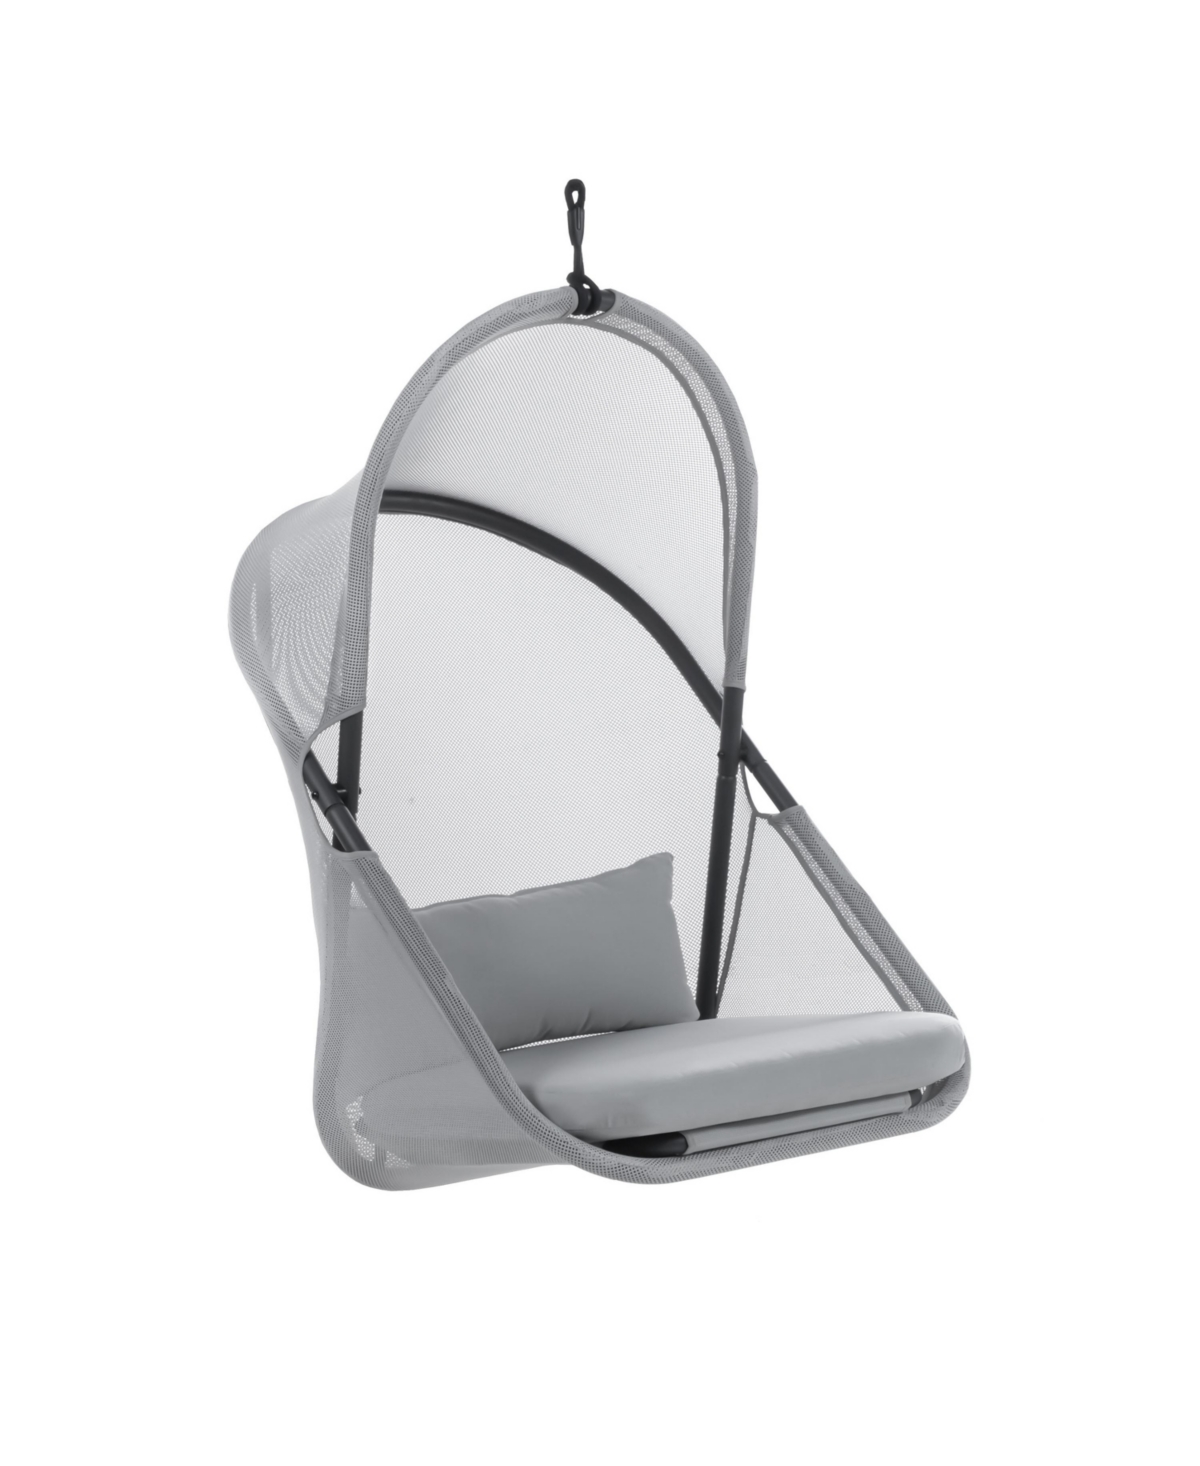 Furniture Of America 43.25" Mesh Foldable Swing Chair With Canopy Low Back Cushion No Stand In Light Gray